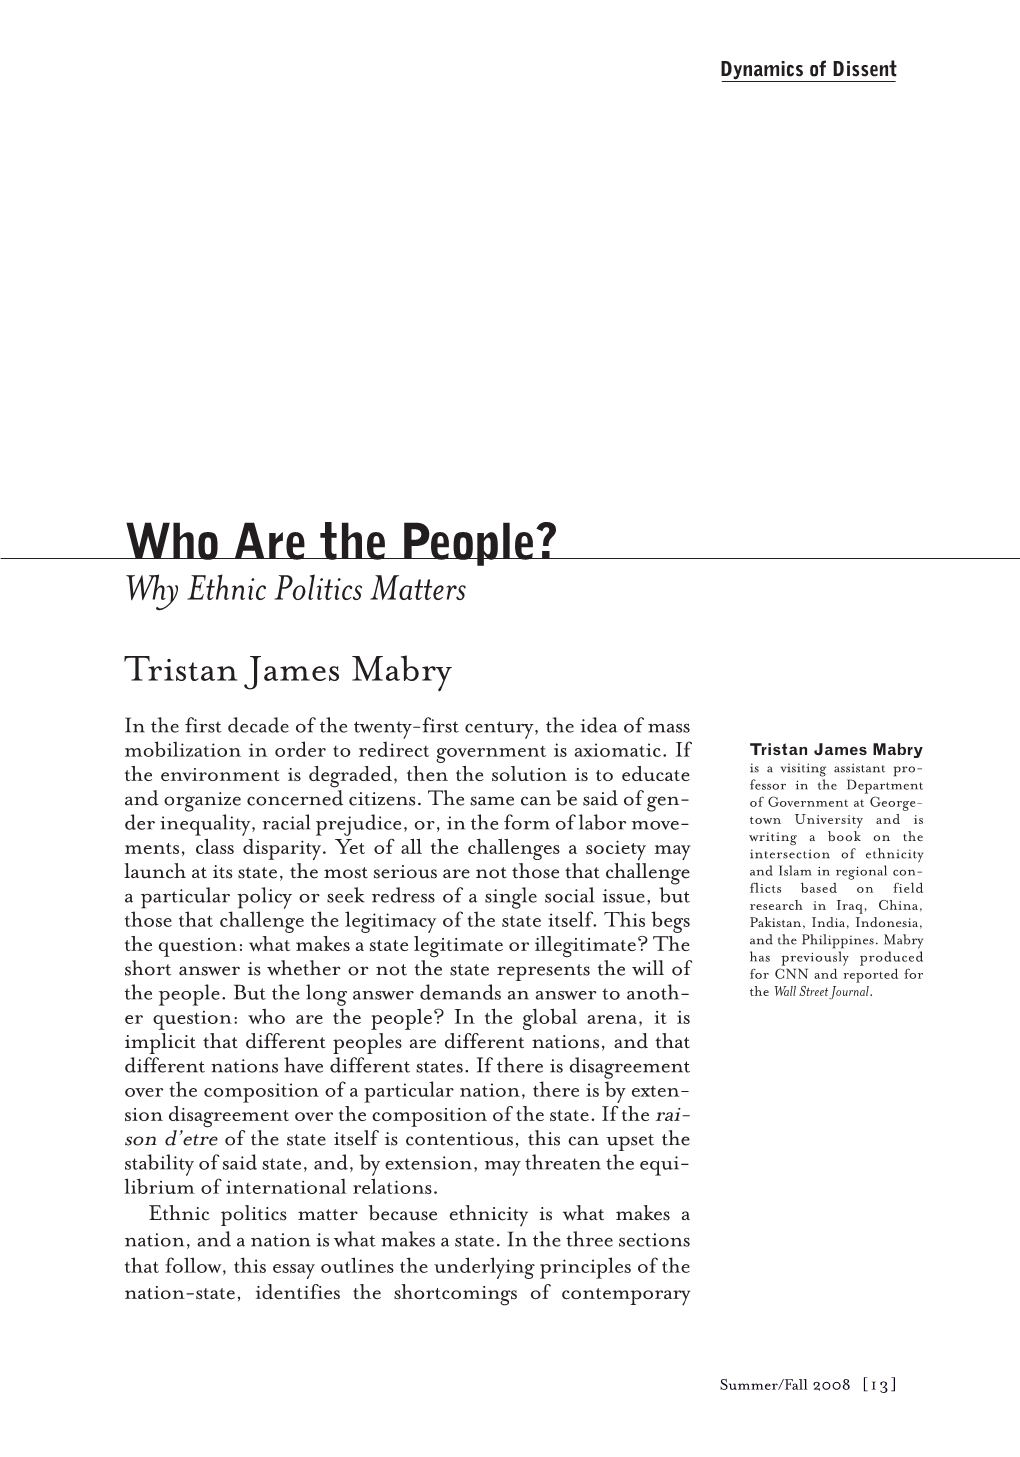 Who Are the People? Why Ethnic Politics Matter